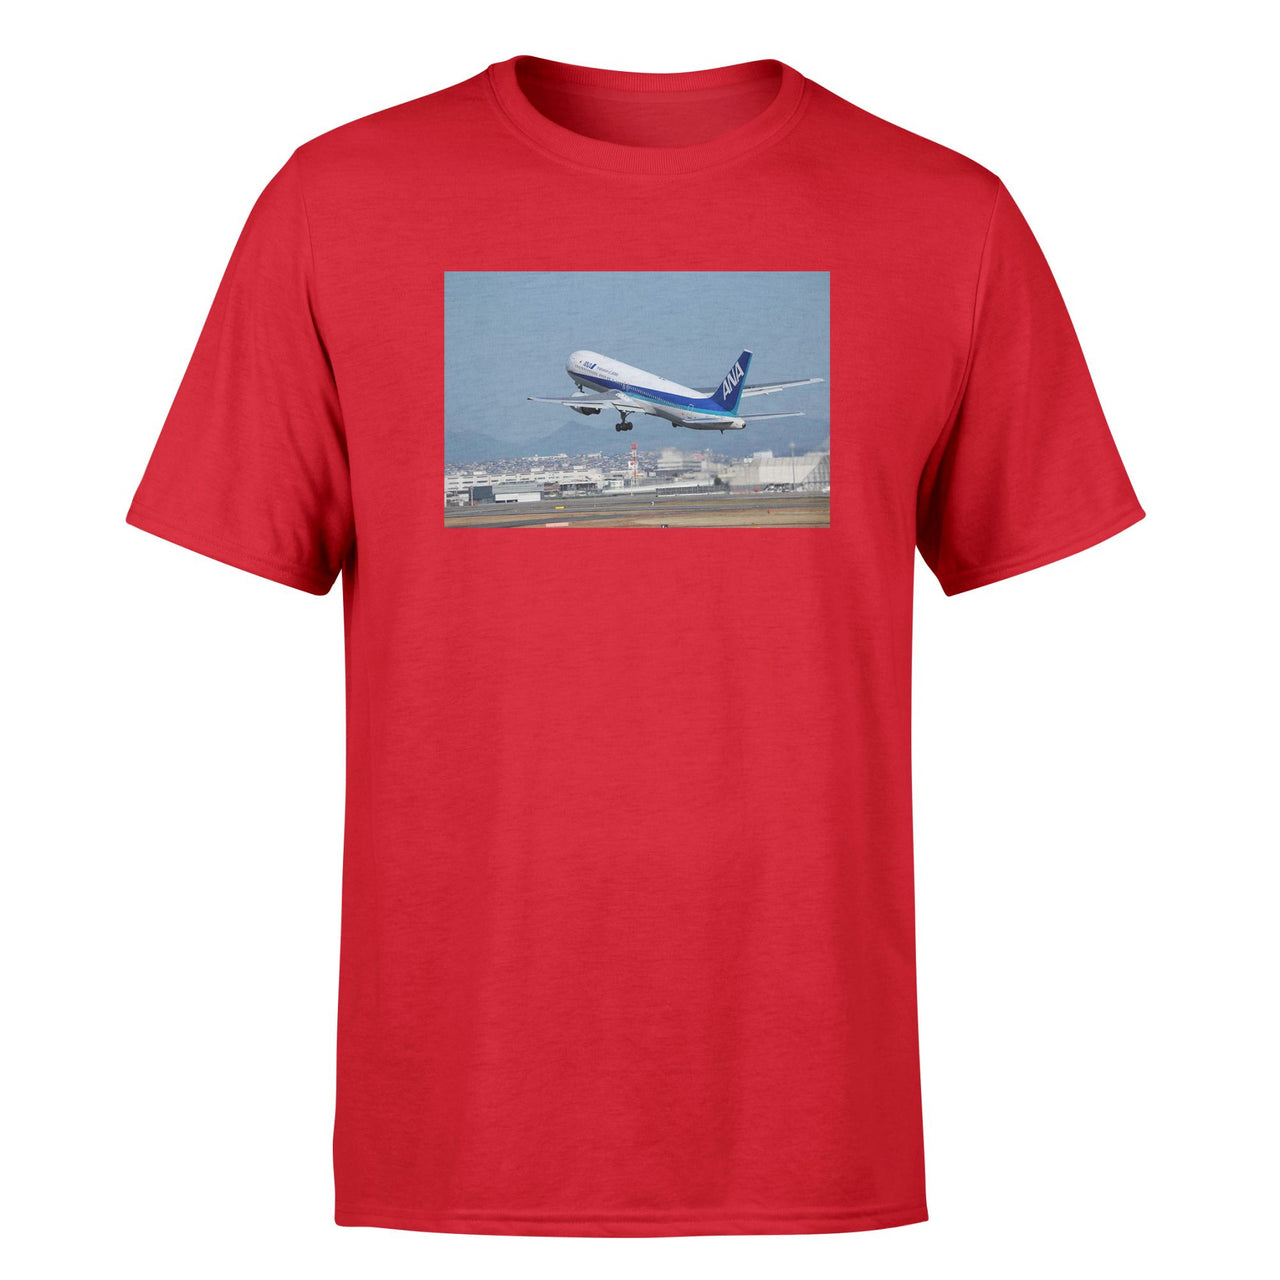 Departing ANA's Boeing 767 Designed T-Shirts